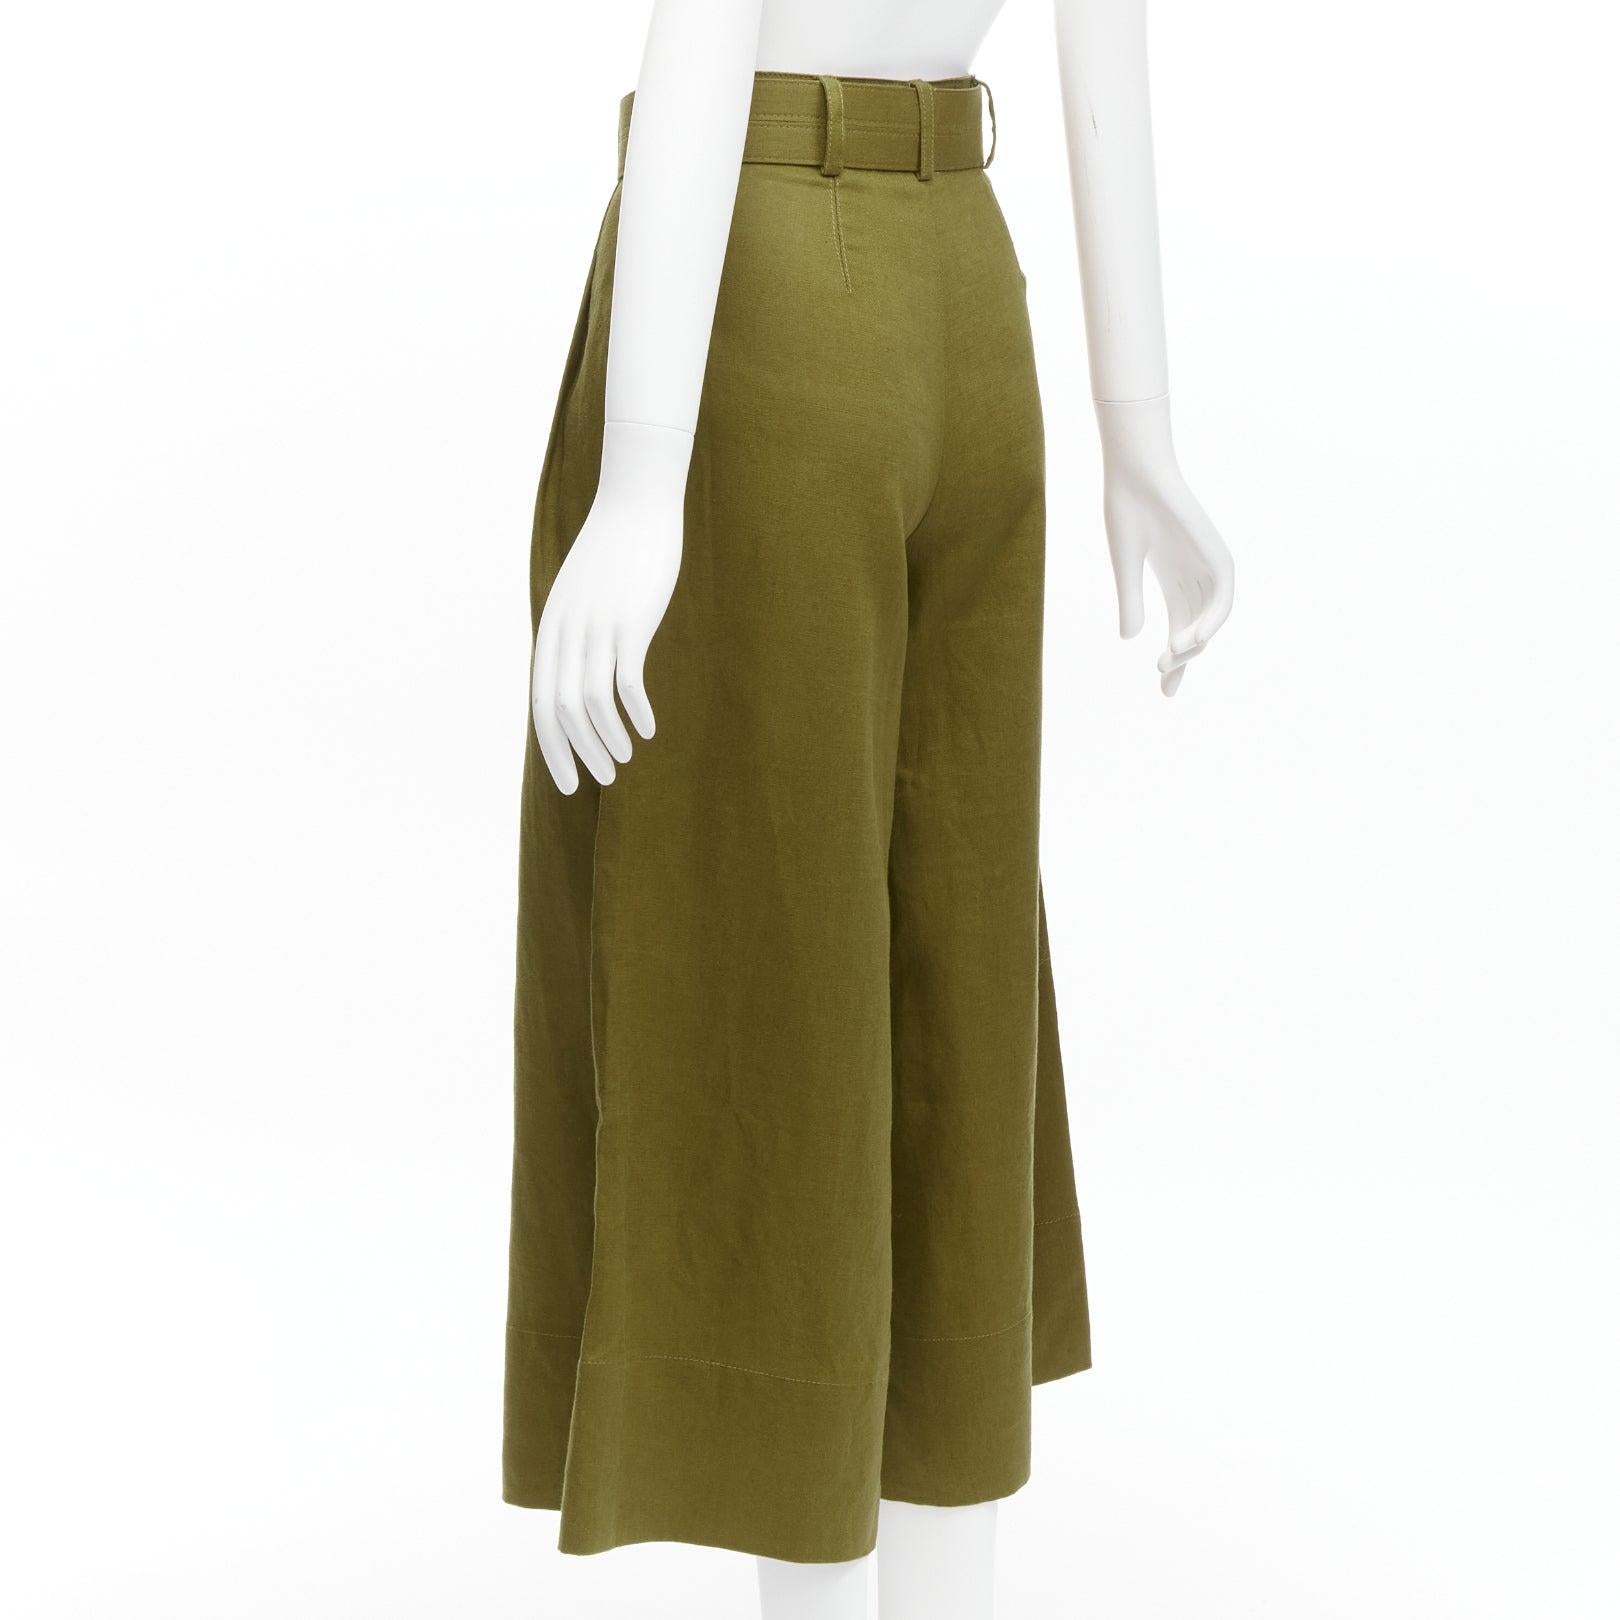 NICHOLAS military green 100% linen high waisted belted wide leg pants US6 M For Sale 1